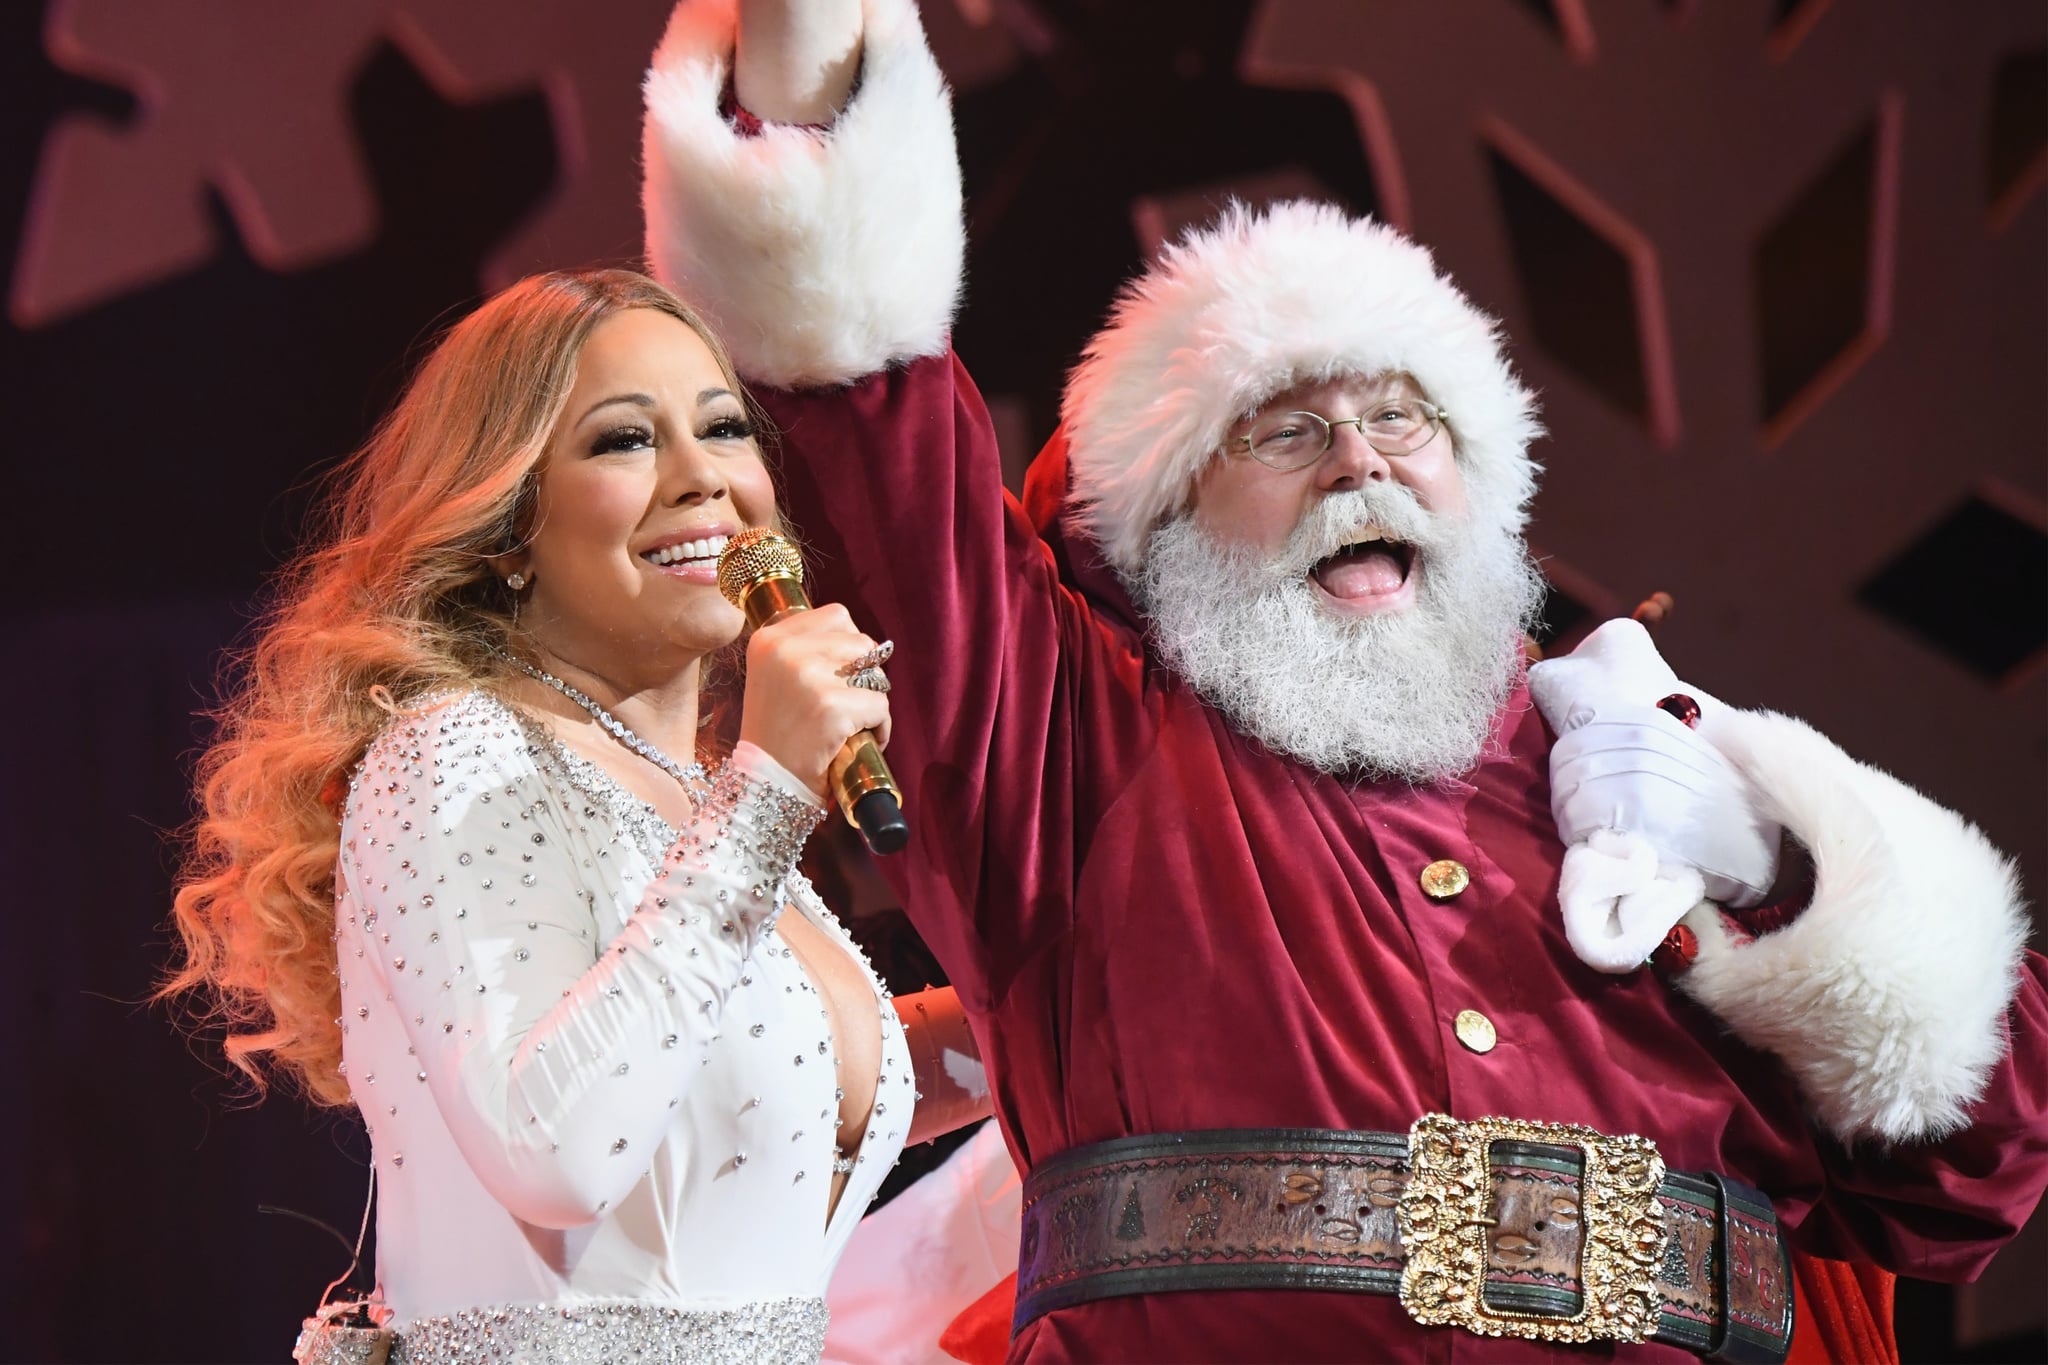 NEW YORK, NY - DECEMBER 05:  Mariah Carey performs during the opening show of Mariah Carey: All I Want For Christmas Is You at Beacon Theatre on December 5, 2016 in New York City.  (Photo by Jeff Kravitz/FilmMagic for Mariah Carey)